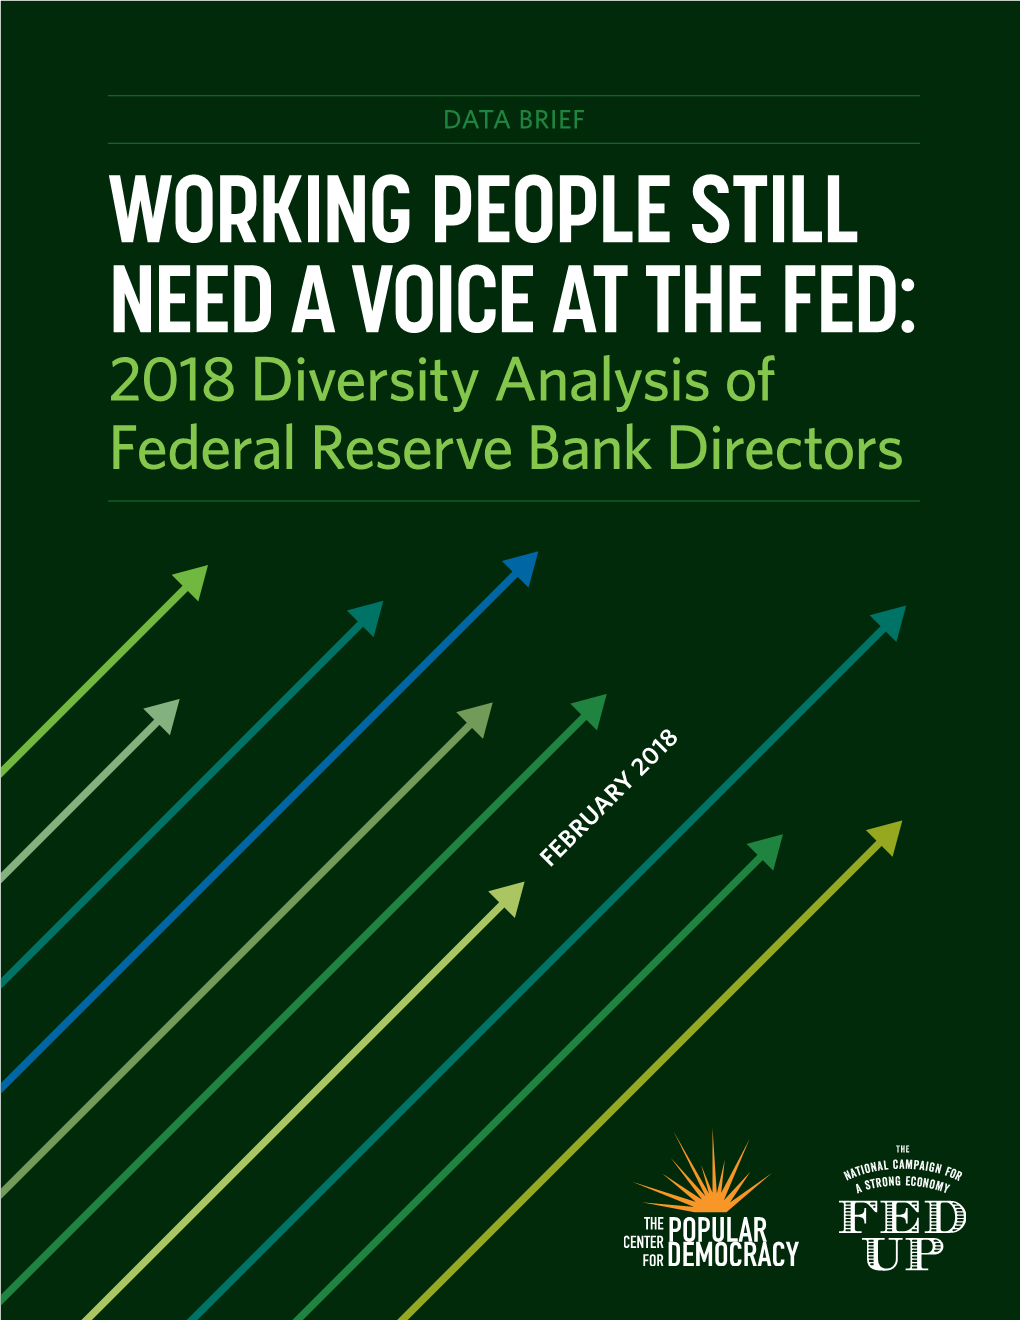 WORKING PEOPLE STILL NEED a VOICE at the FED: 2018 Diversity Analysis of Federal Reserve Bank Directors